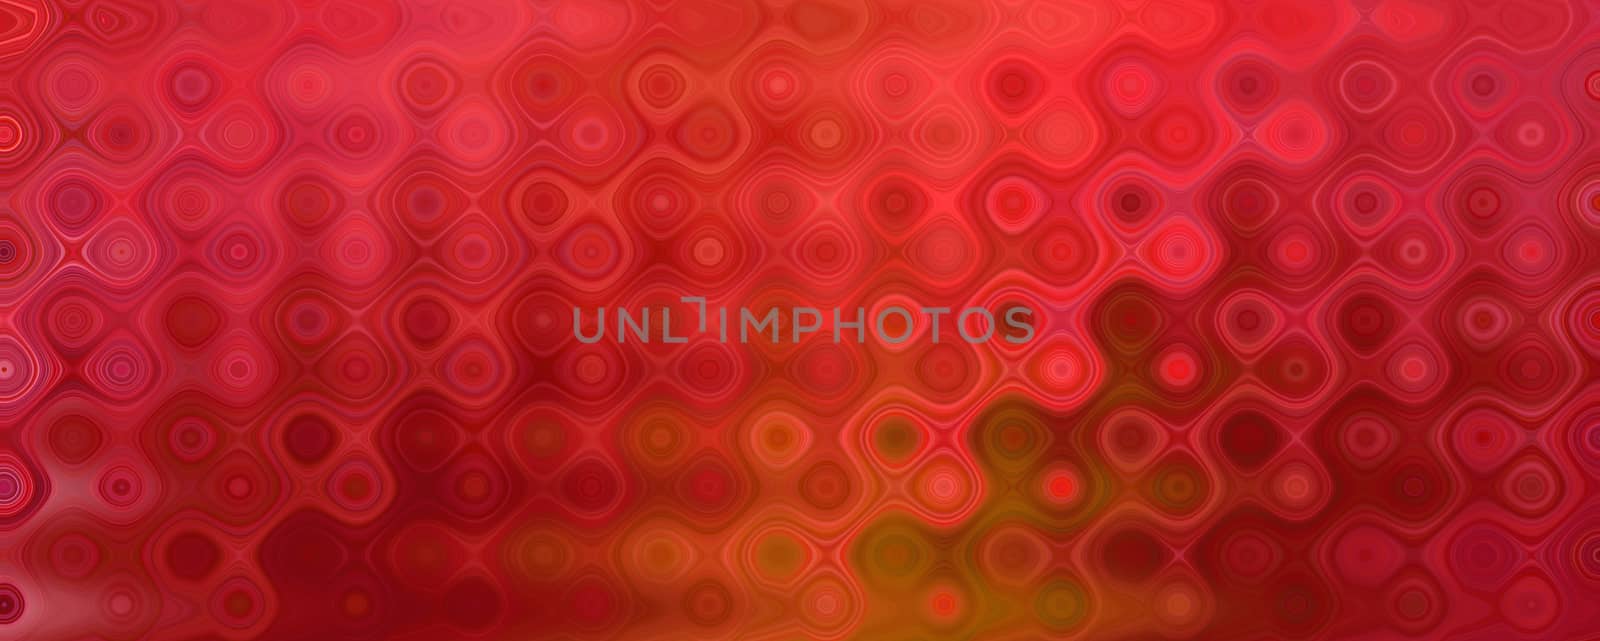 Abstract stylish background for design. Stylish red background for presentation, wallpaper, banner.